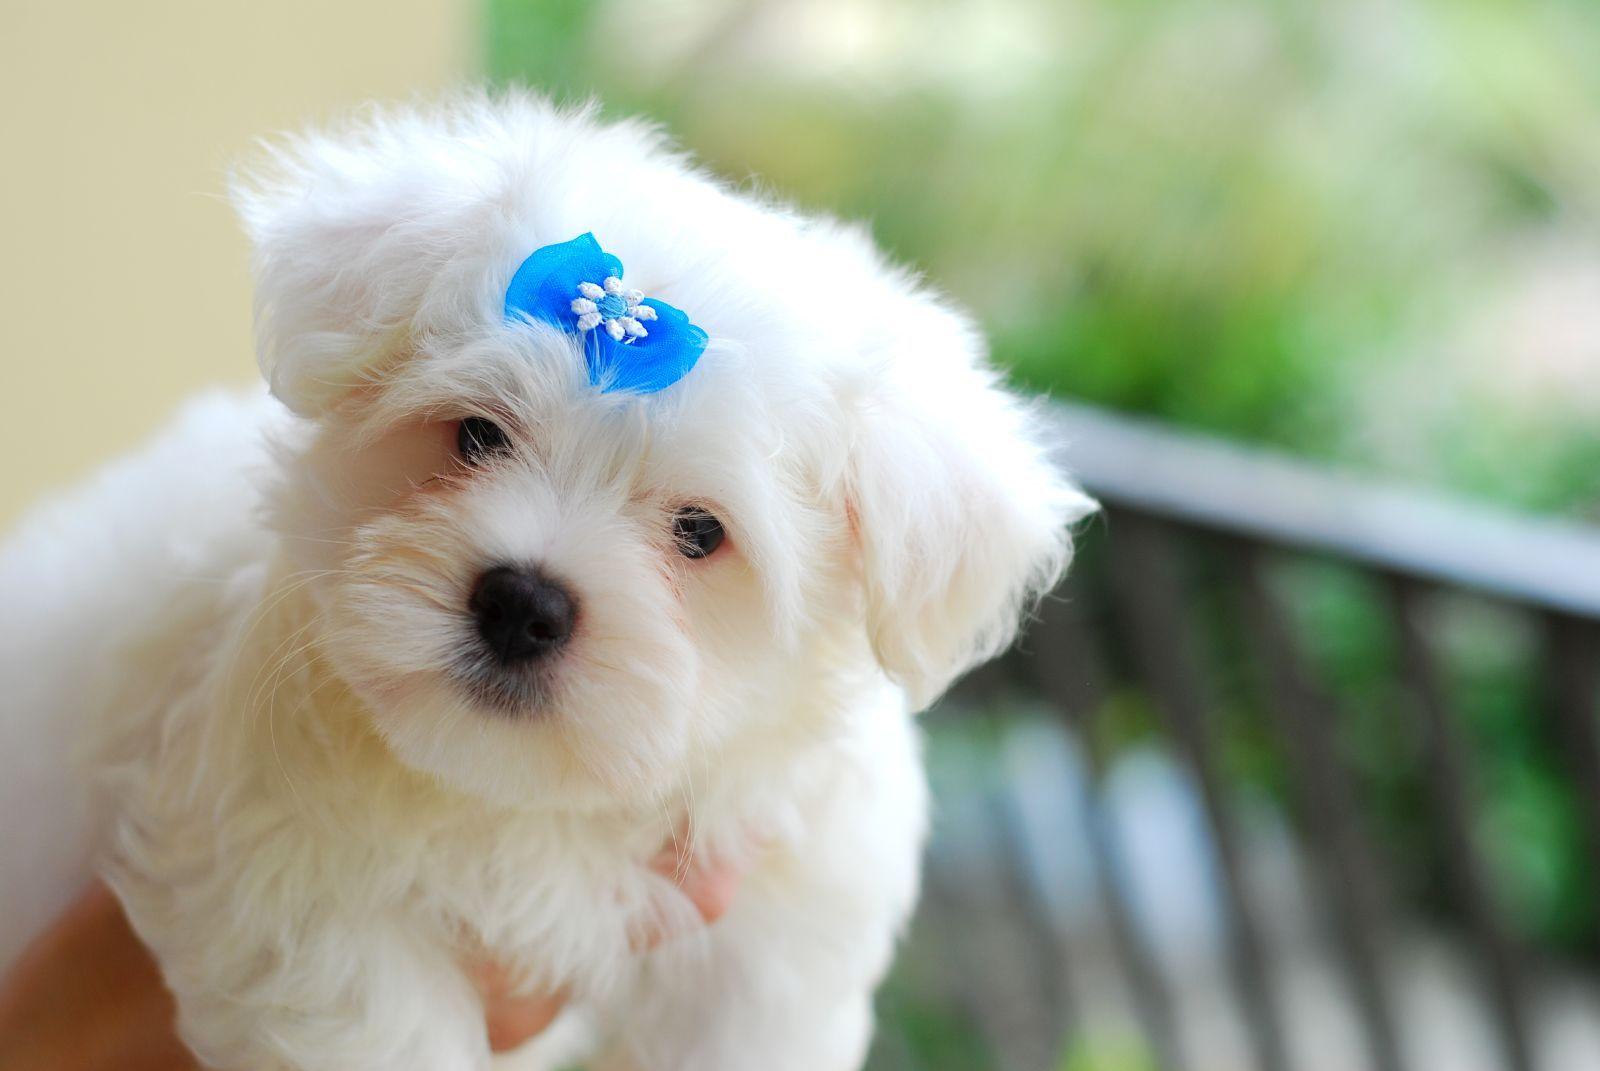 Cute Dogs and Puppies Wallpaper For Mobile